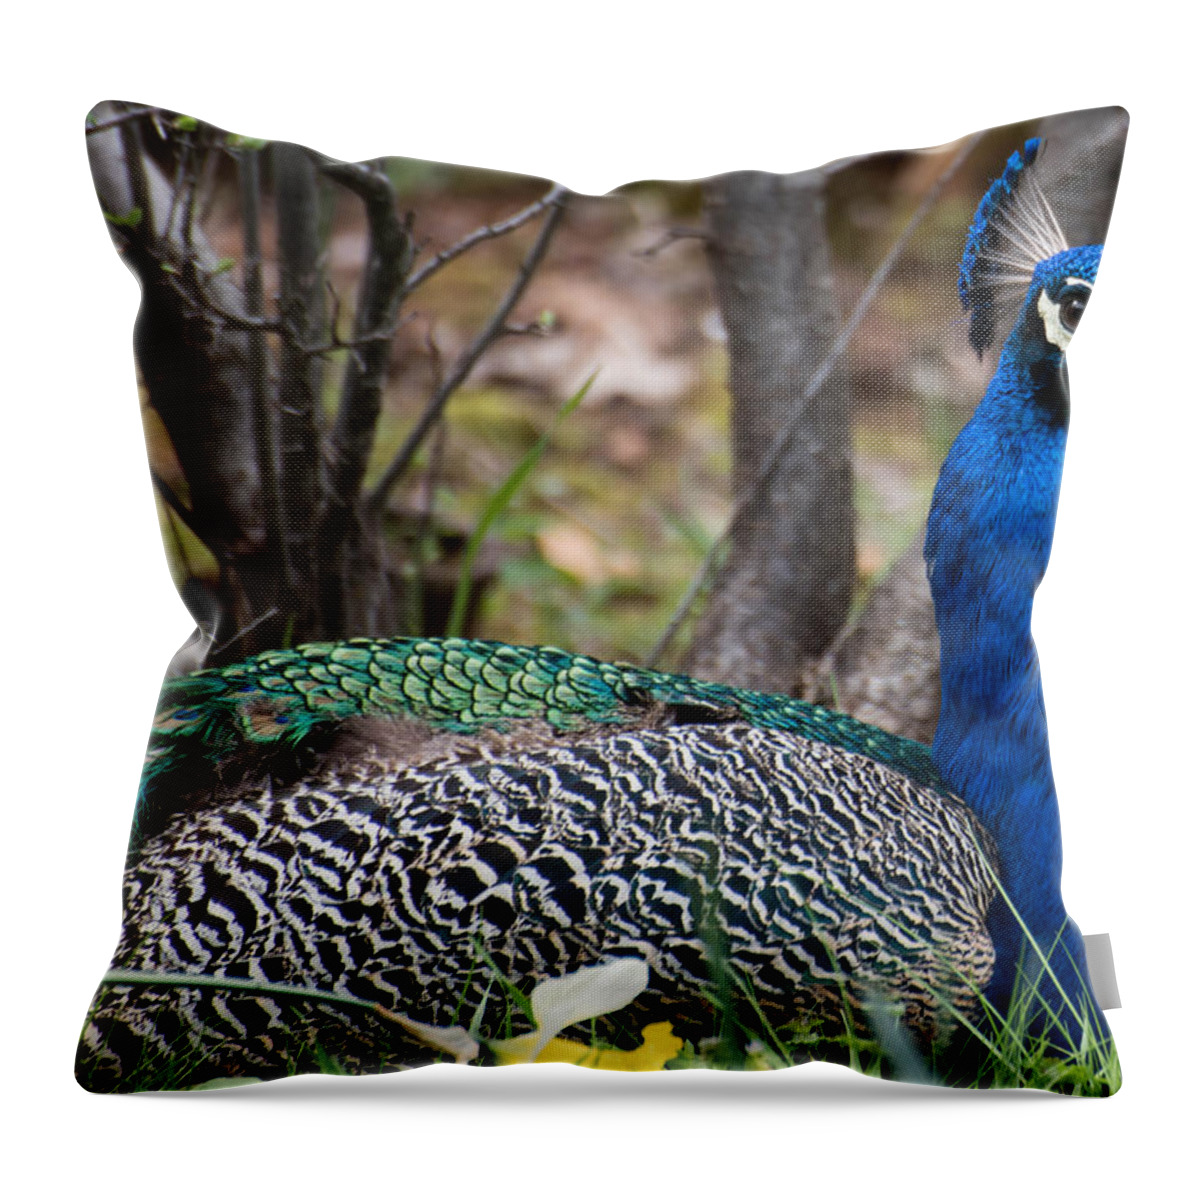  Throw Pillow featuring the photograph Sitting Pretty by Wendy Carrington